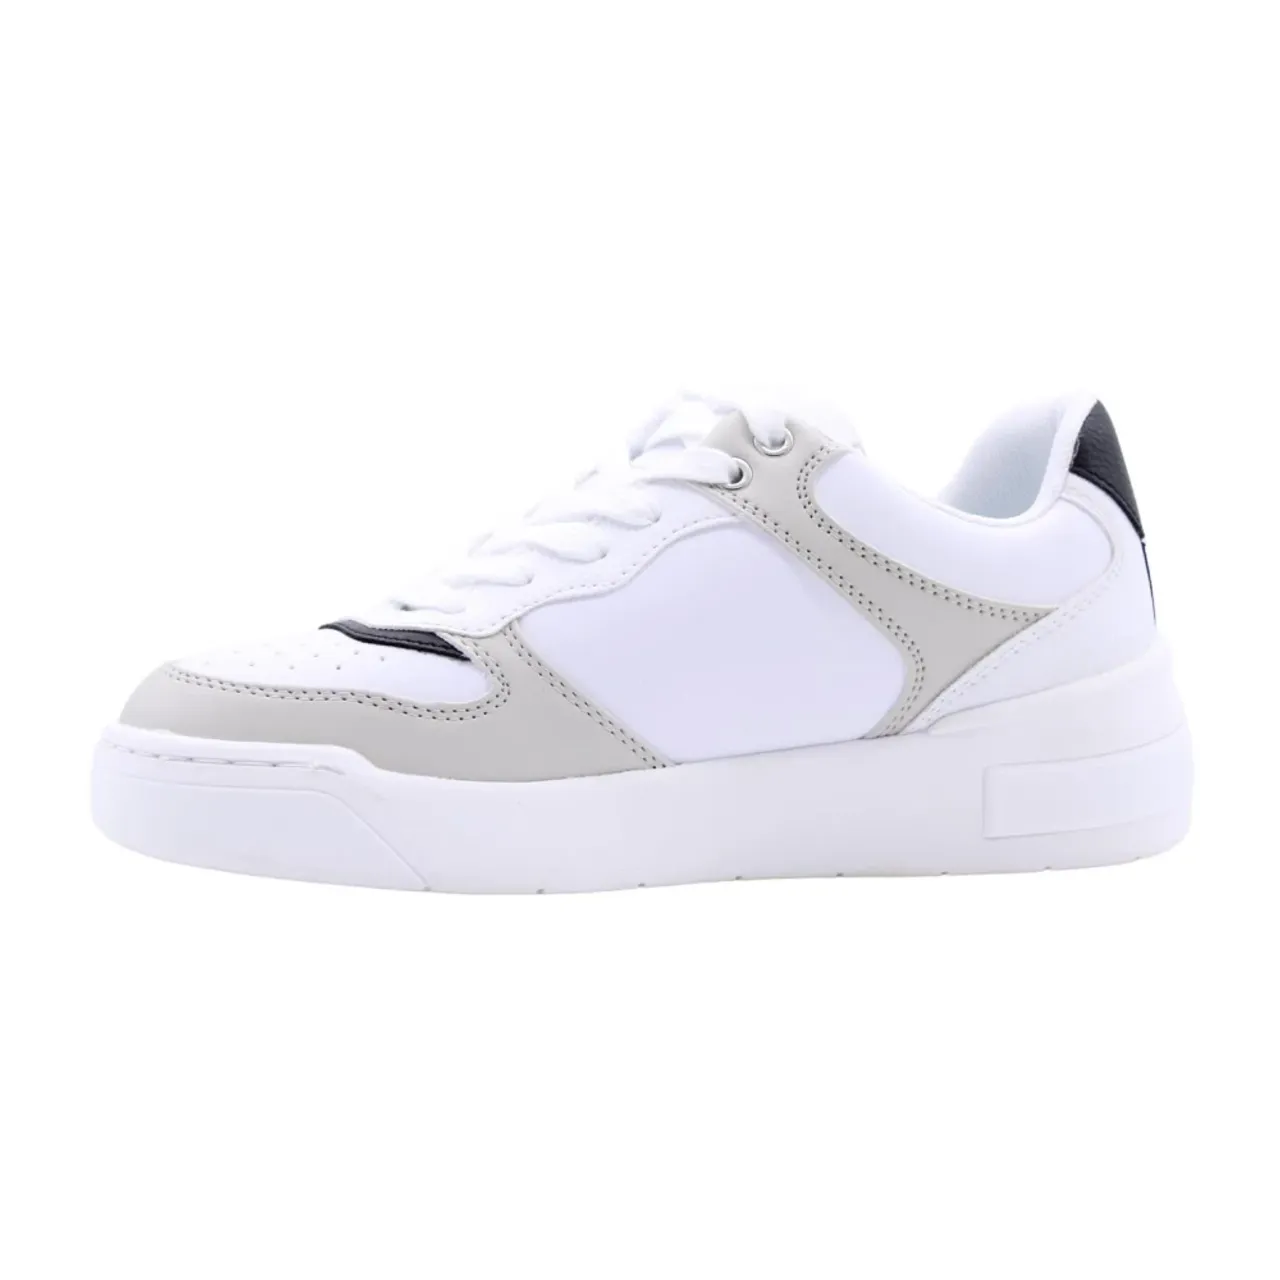 Guess , Clarcky Sneaker ,White female, Sizes: